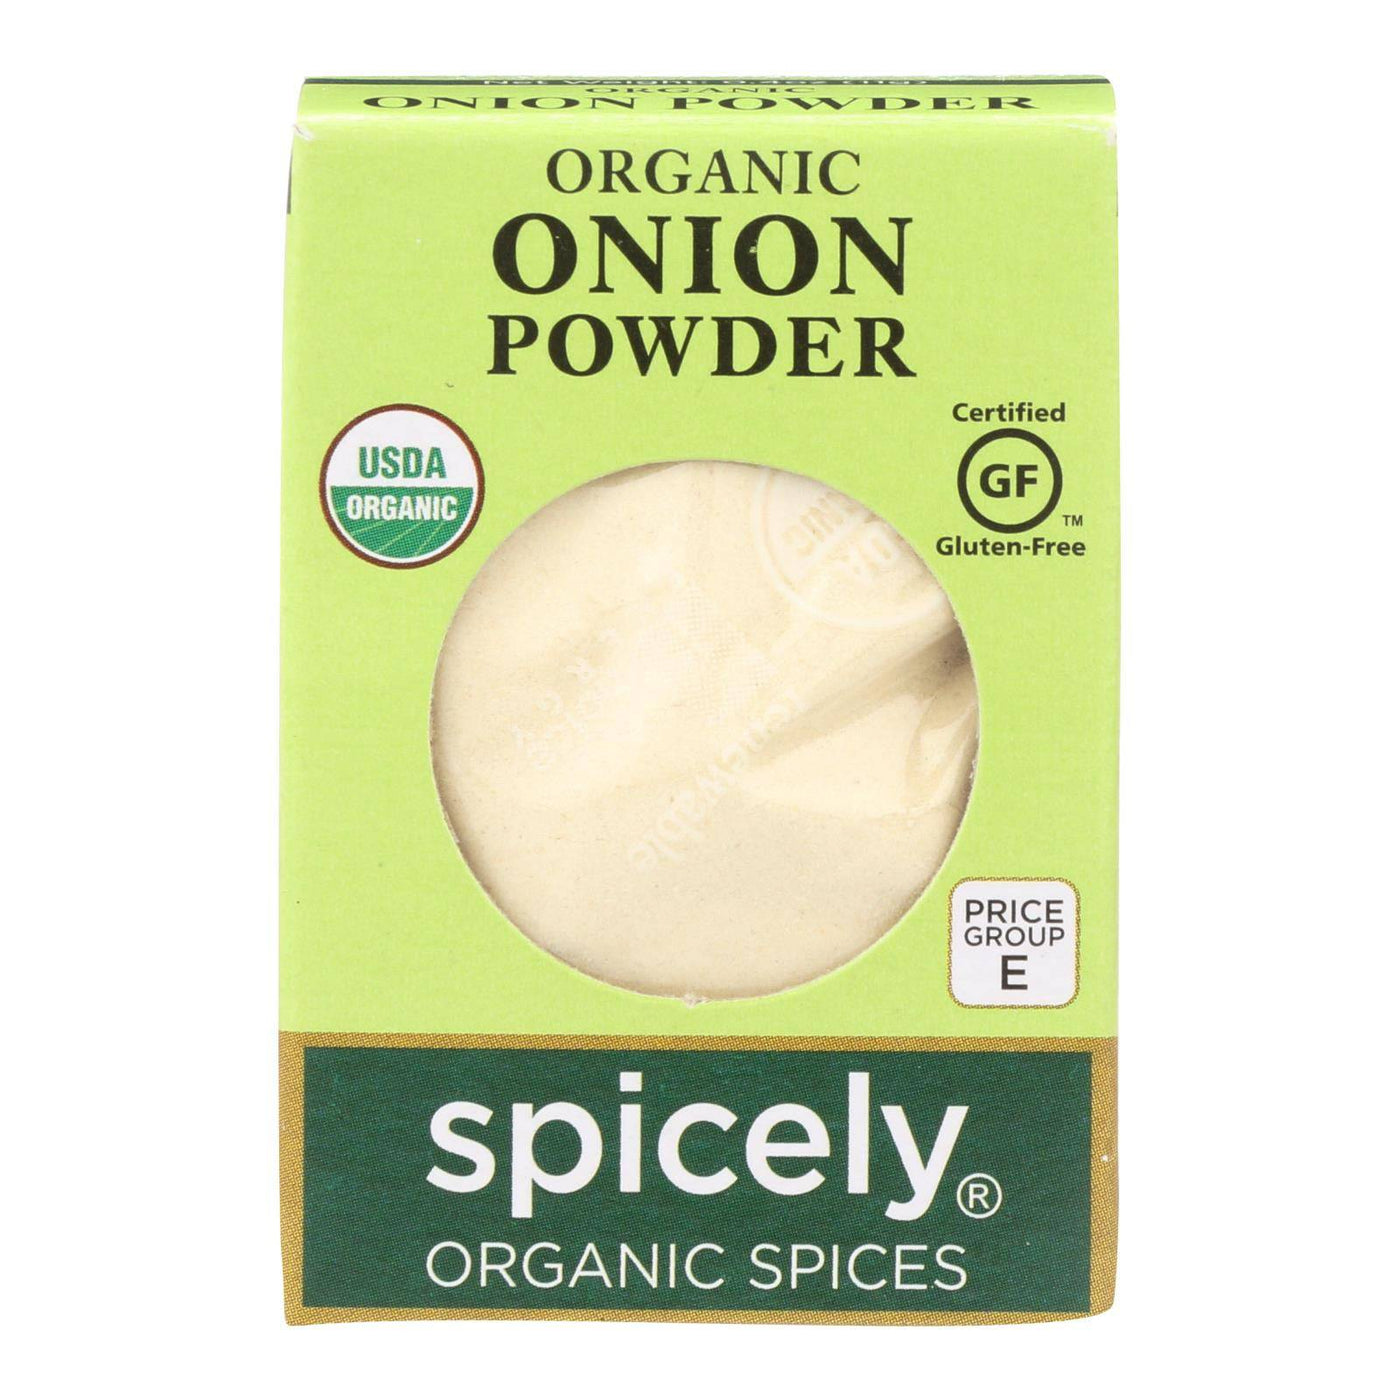 Buy Spicely Organics - Organic Onion Powder - Case Of 6 - 0.4 Oz.  at OnlyNaturals.us